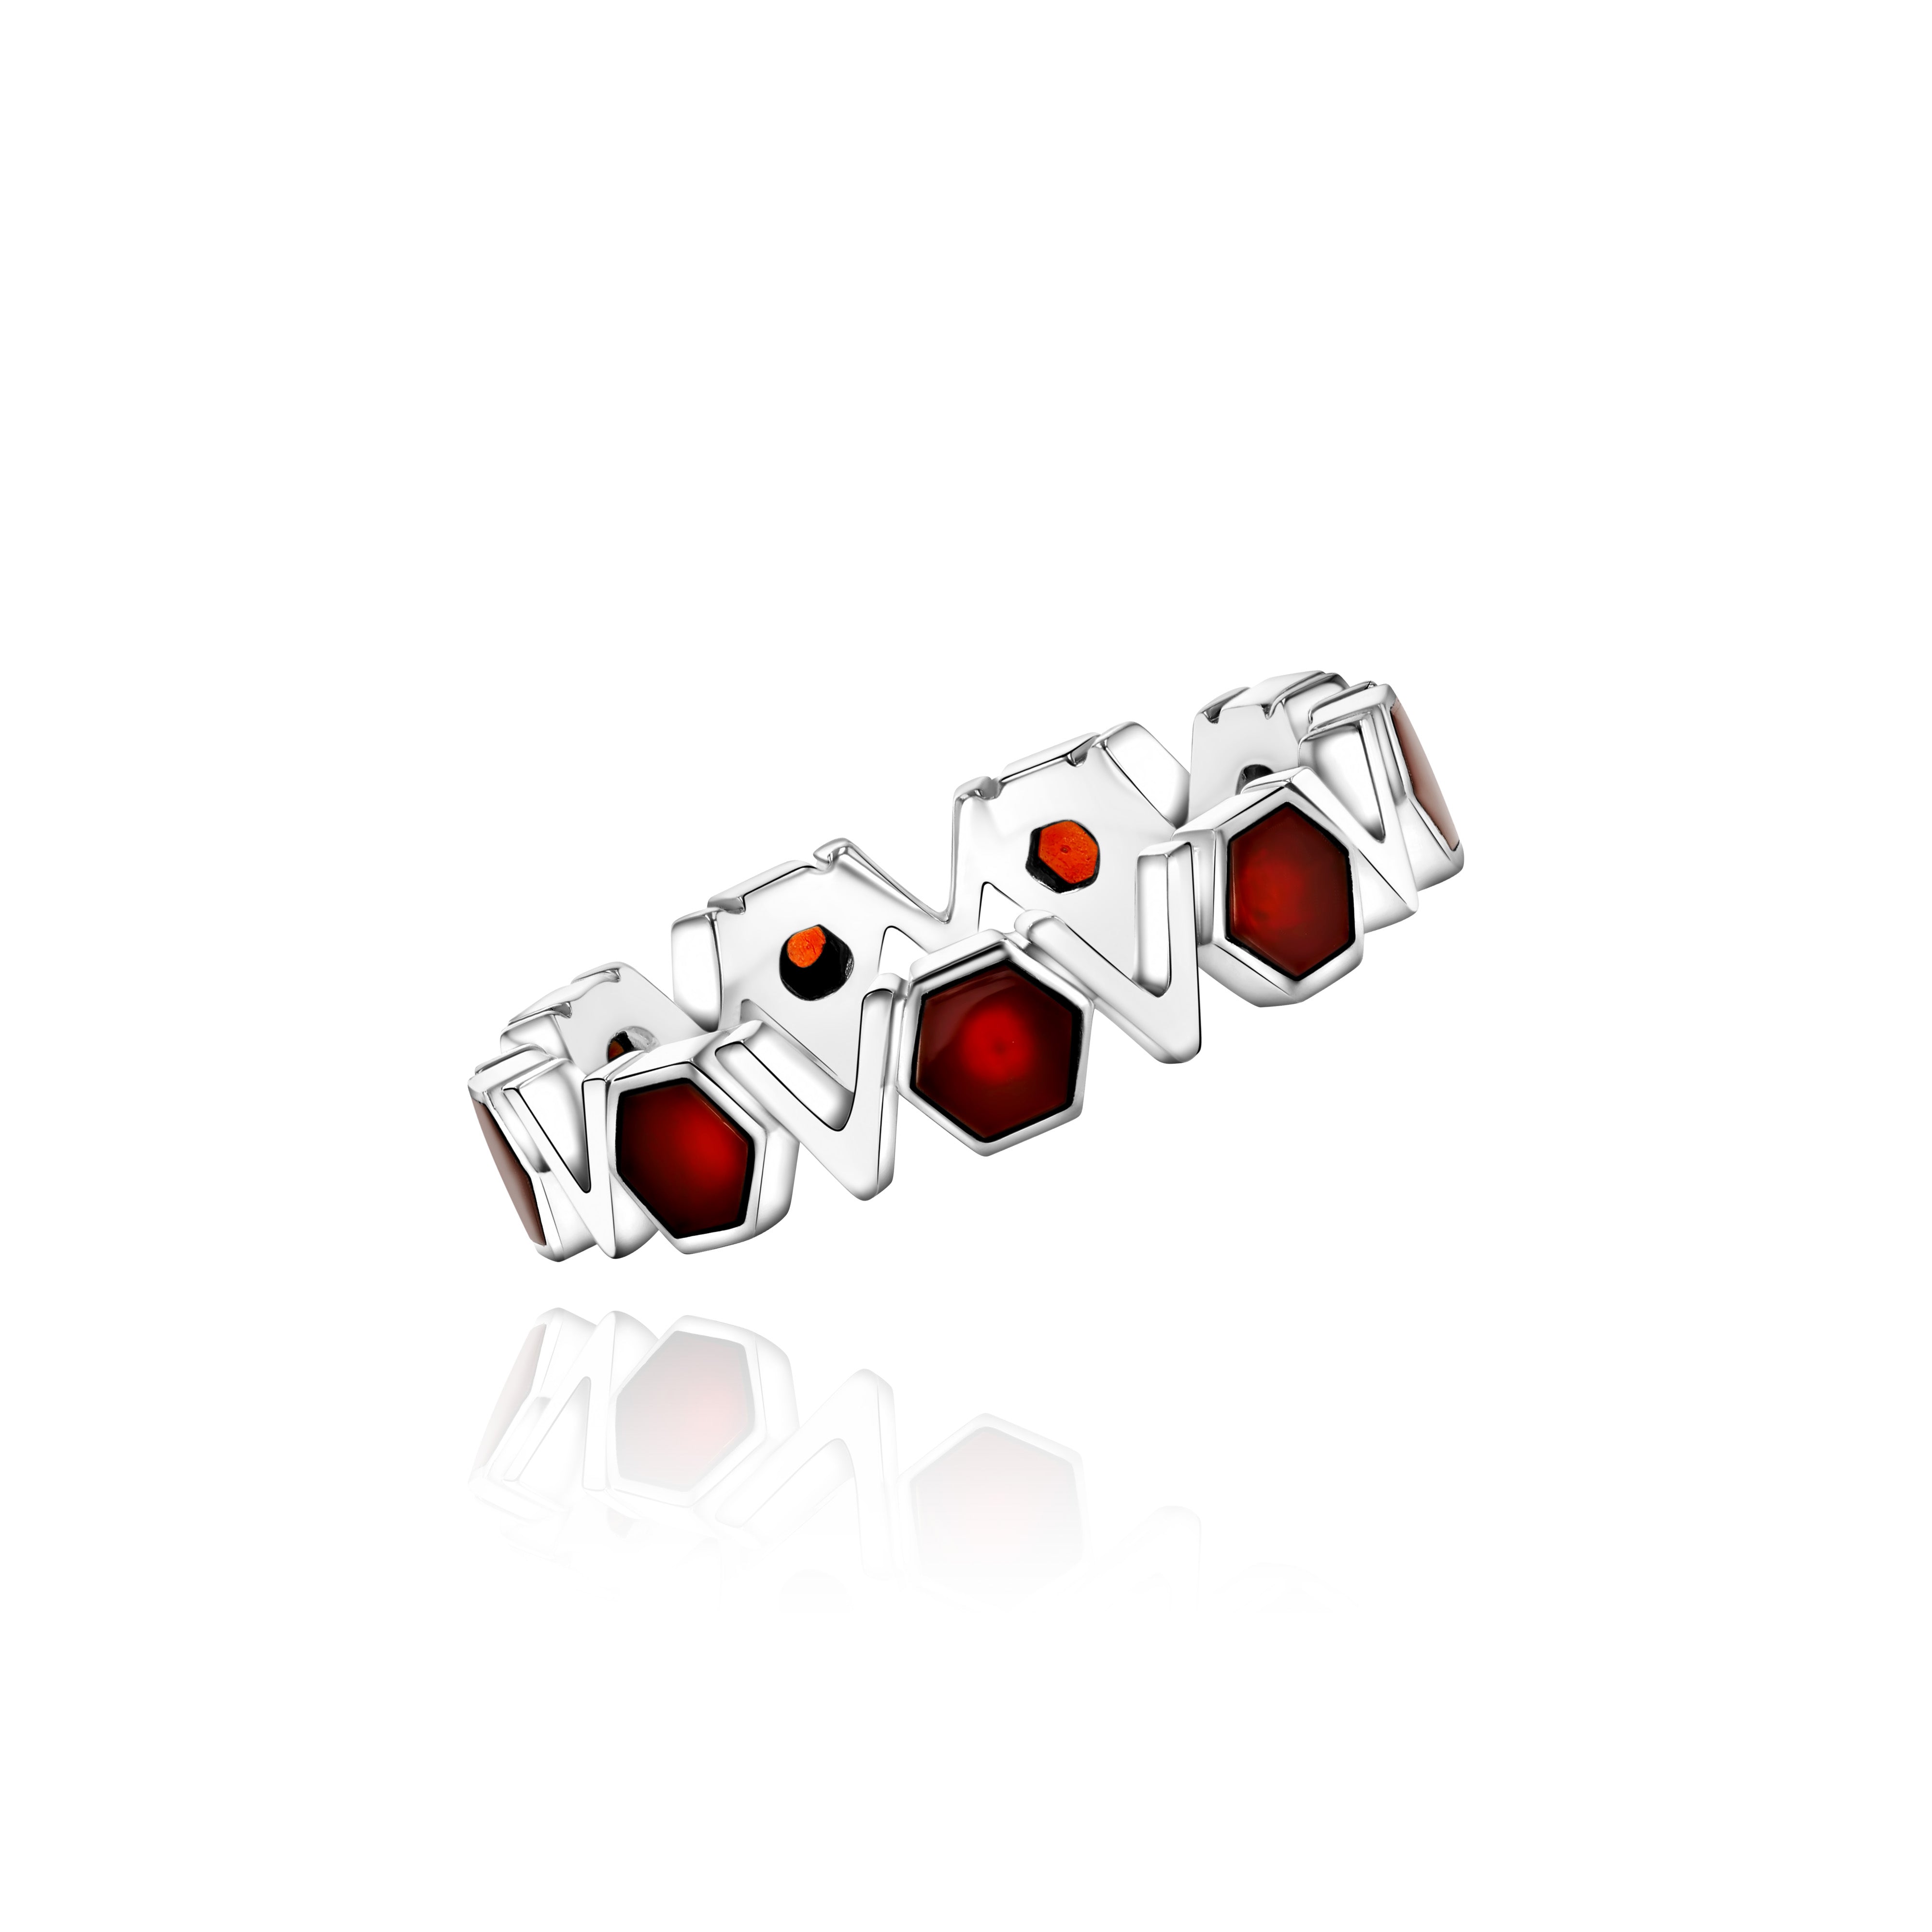 Silver Band with repeating Carnelian octagons and V shapes, Medium